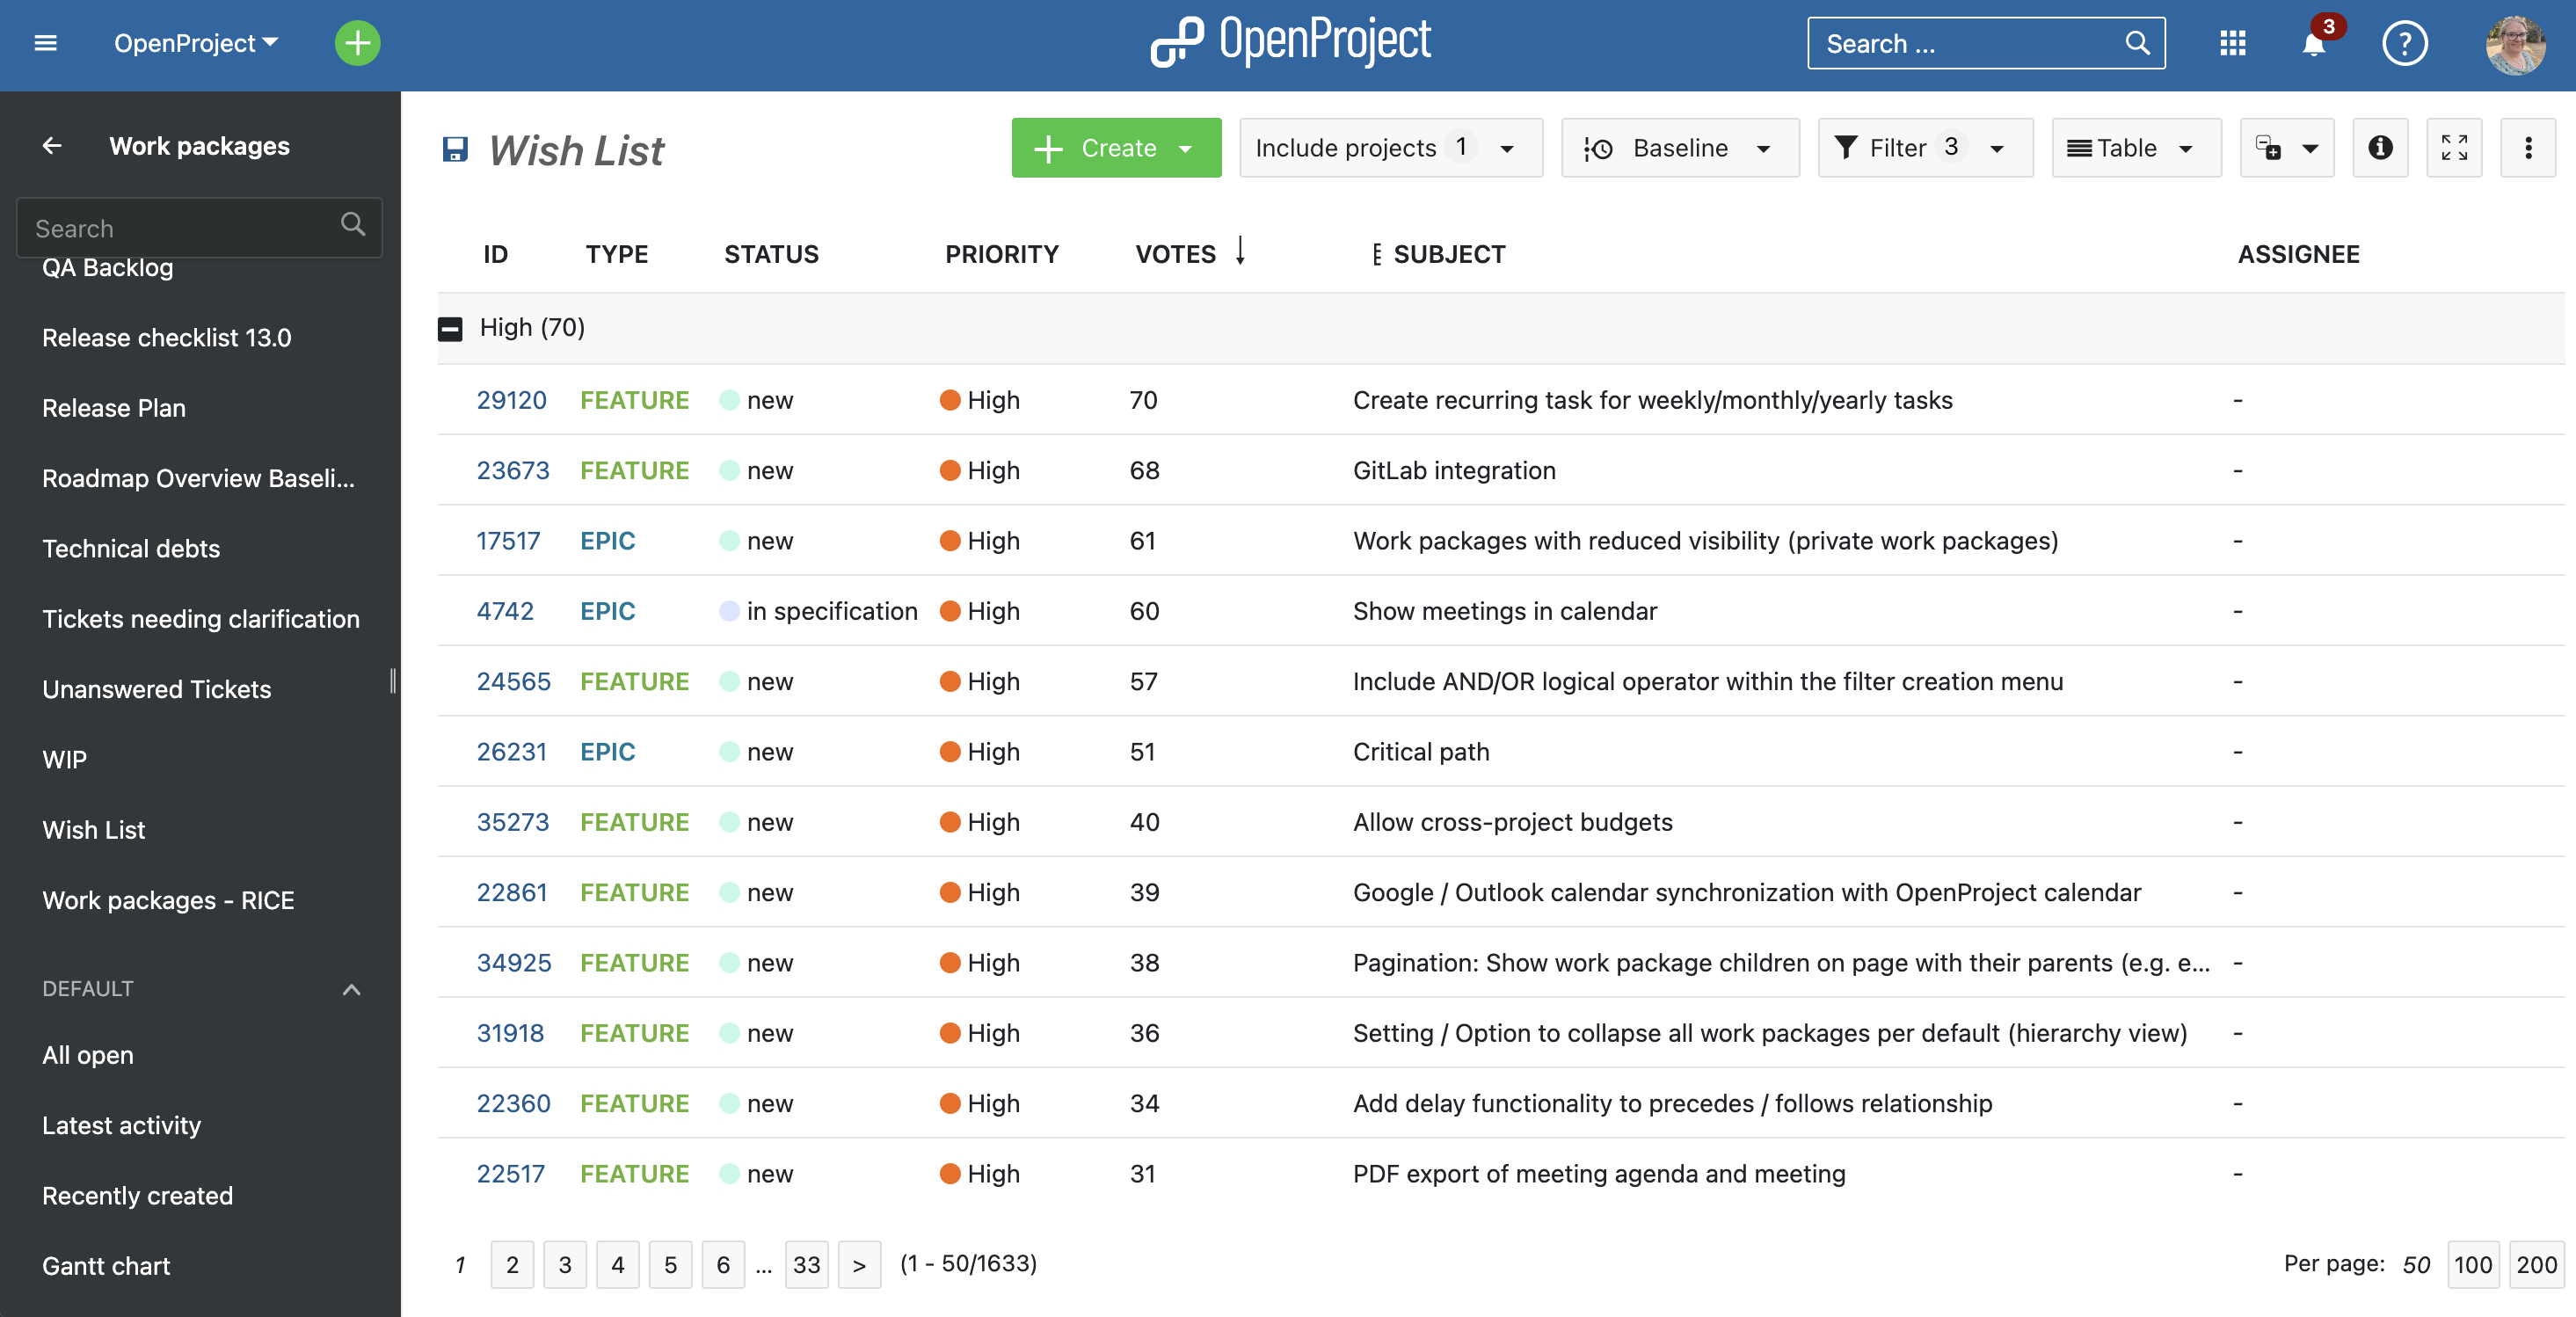 Screenshot of our Community wishlist for OpenProject